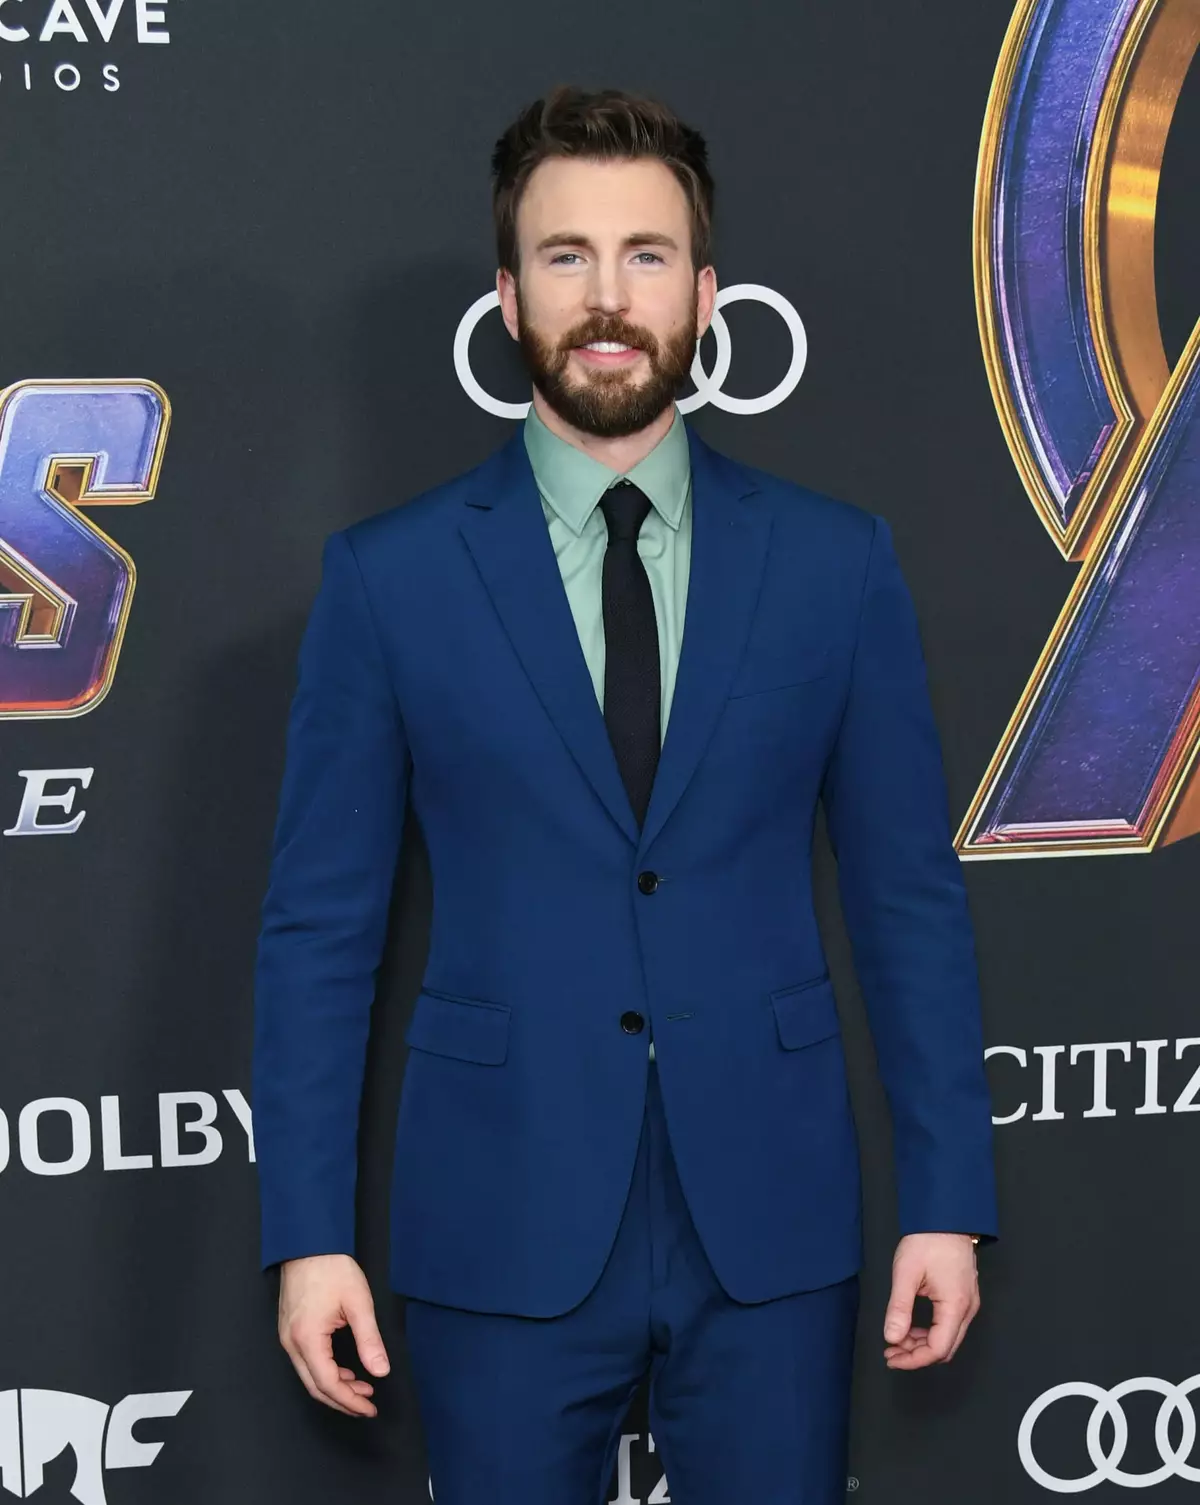 Chris Evans set social media ablaze earlier this week when he accidentally posted a NSFW pic (